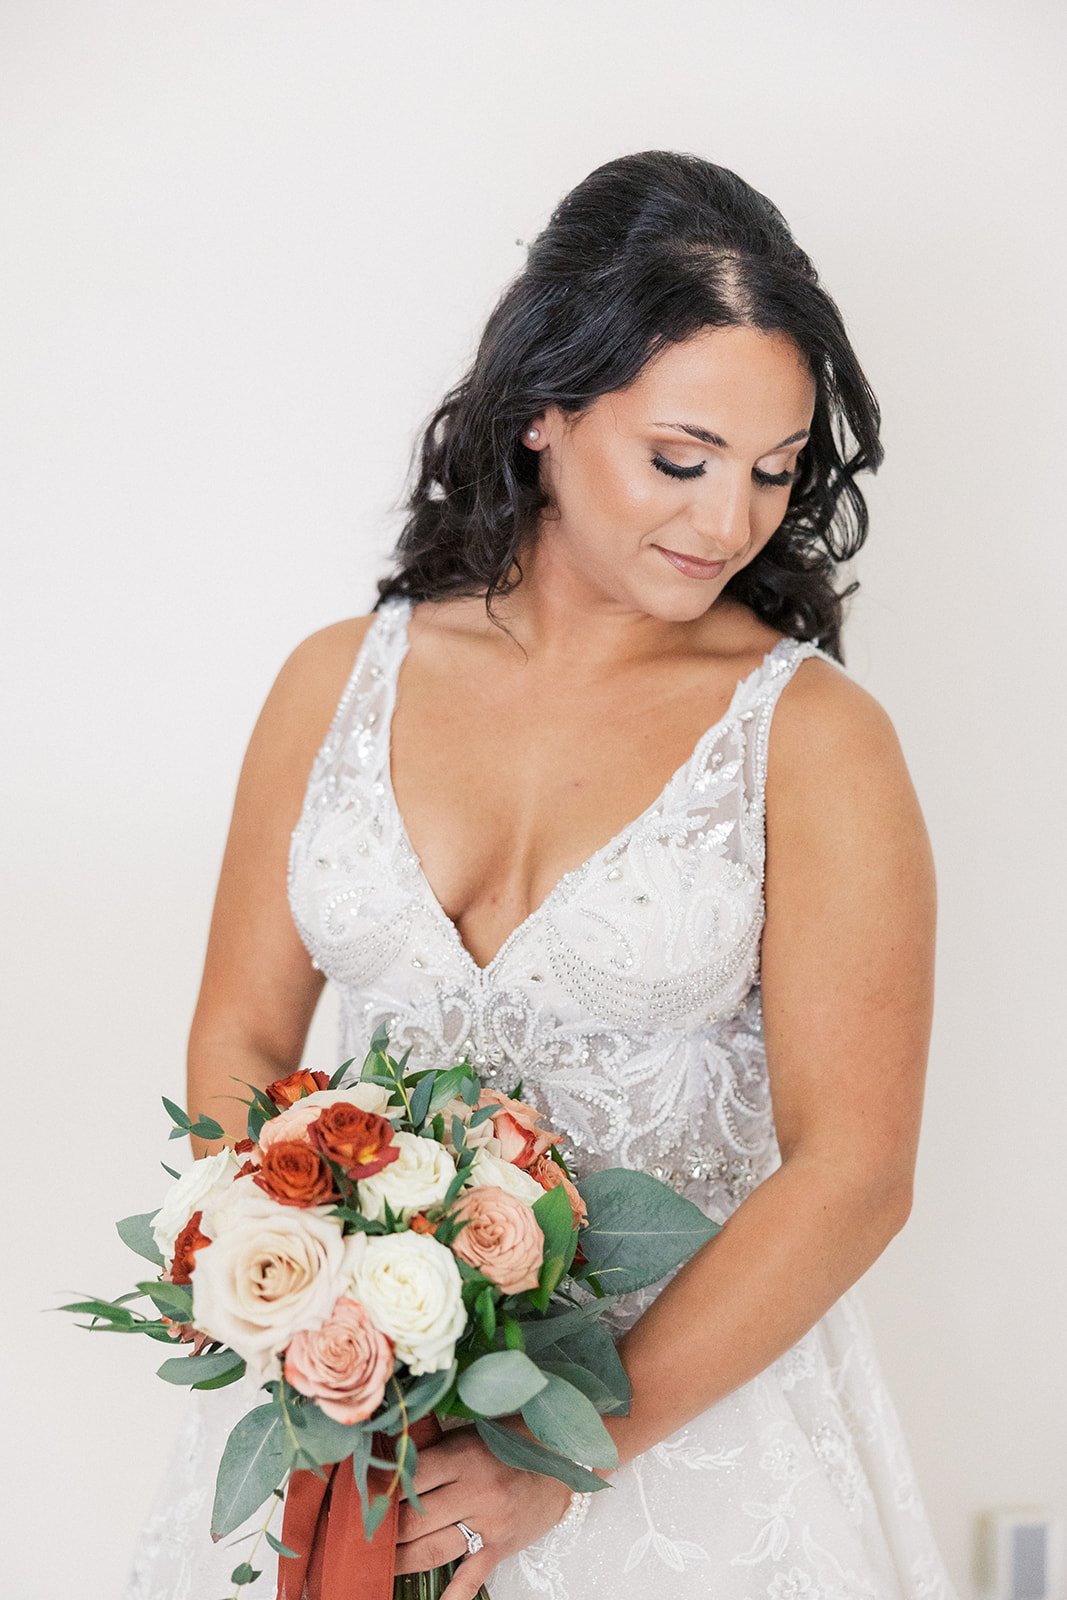 A bride smiles down her shoulder while standing in a white room holding her red and white rose bouquet